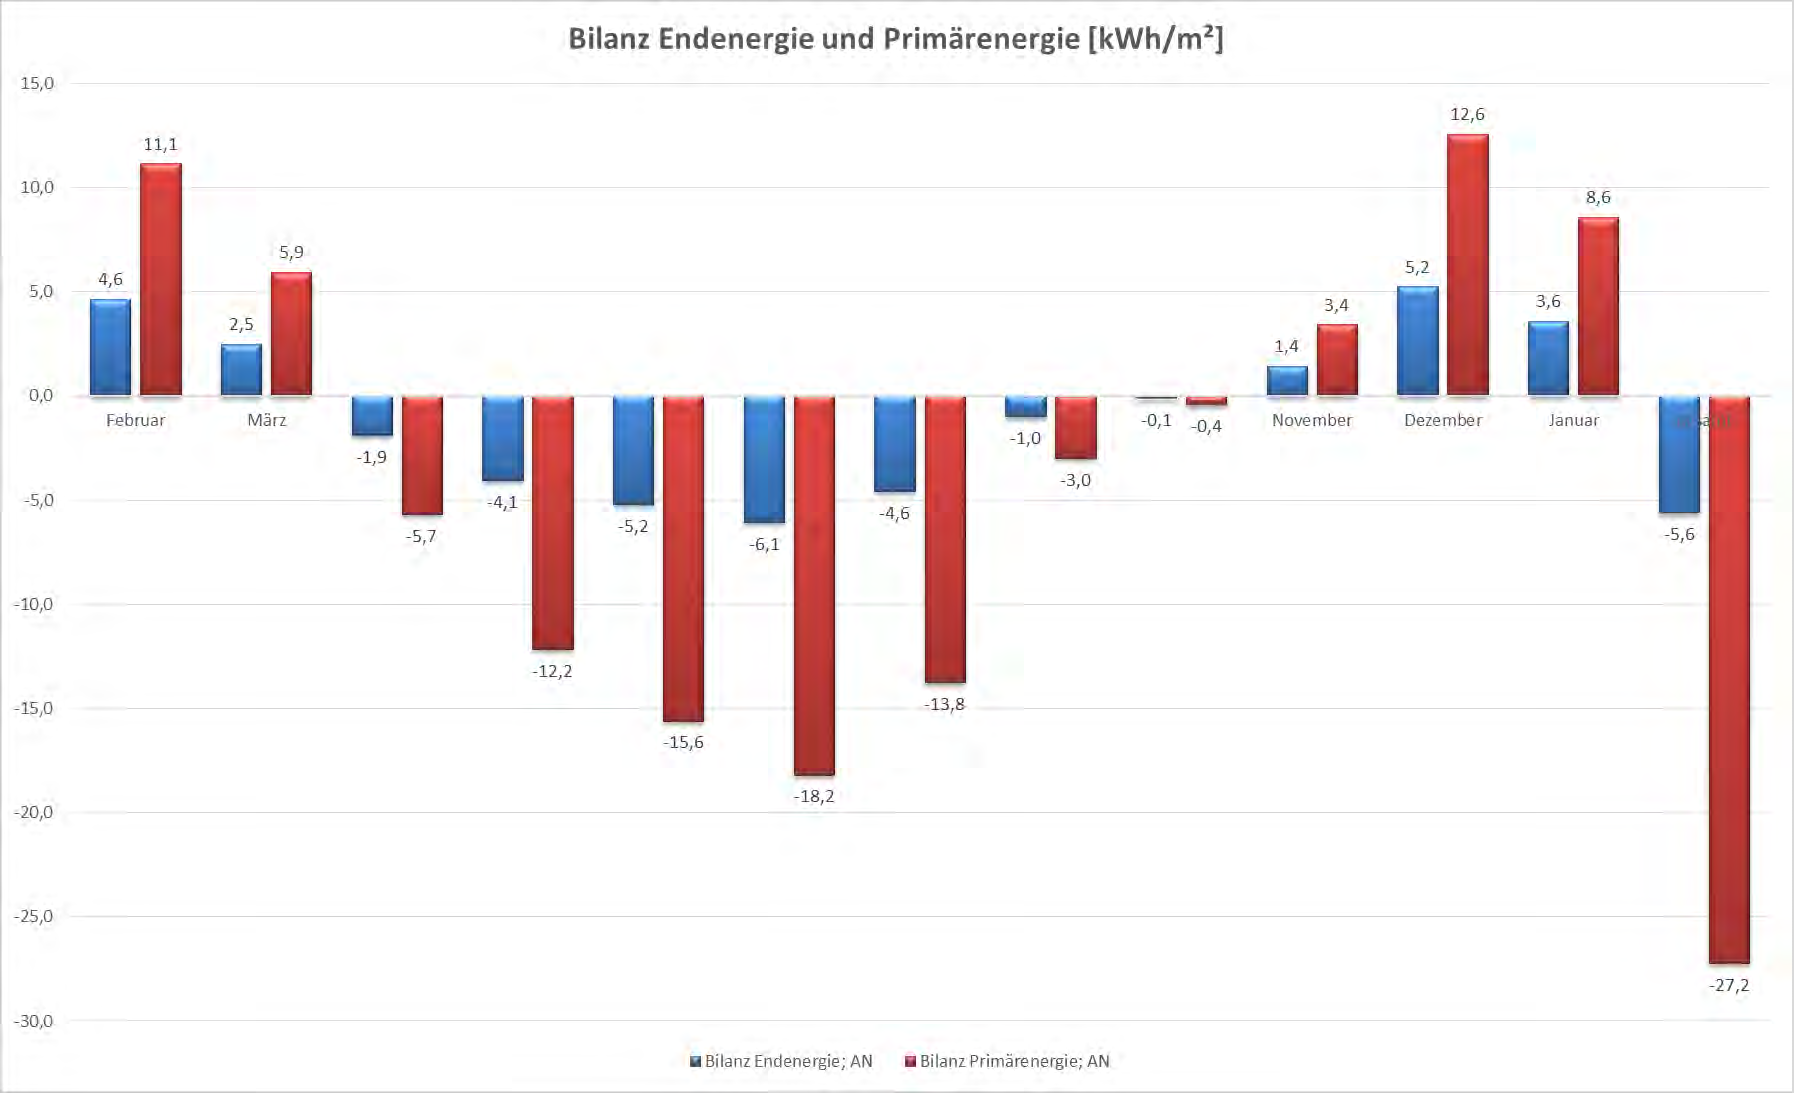 Endenergie: Soll: - 22 kwh/m²a Ist: - 5,6 kwh/(m²a) Primärenergie: Soll: - 65